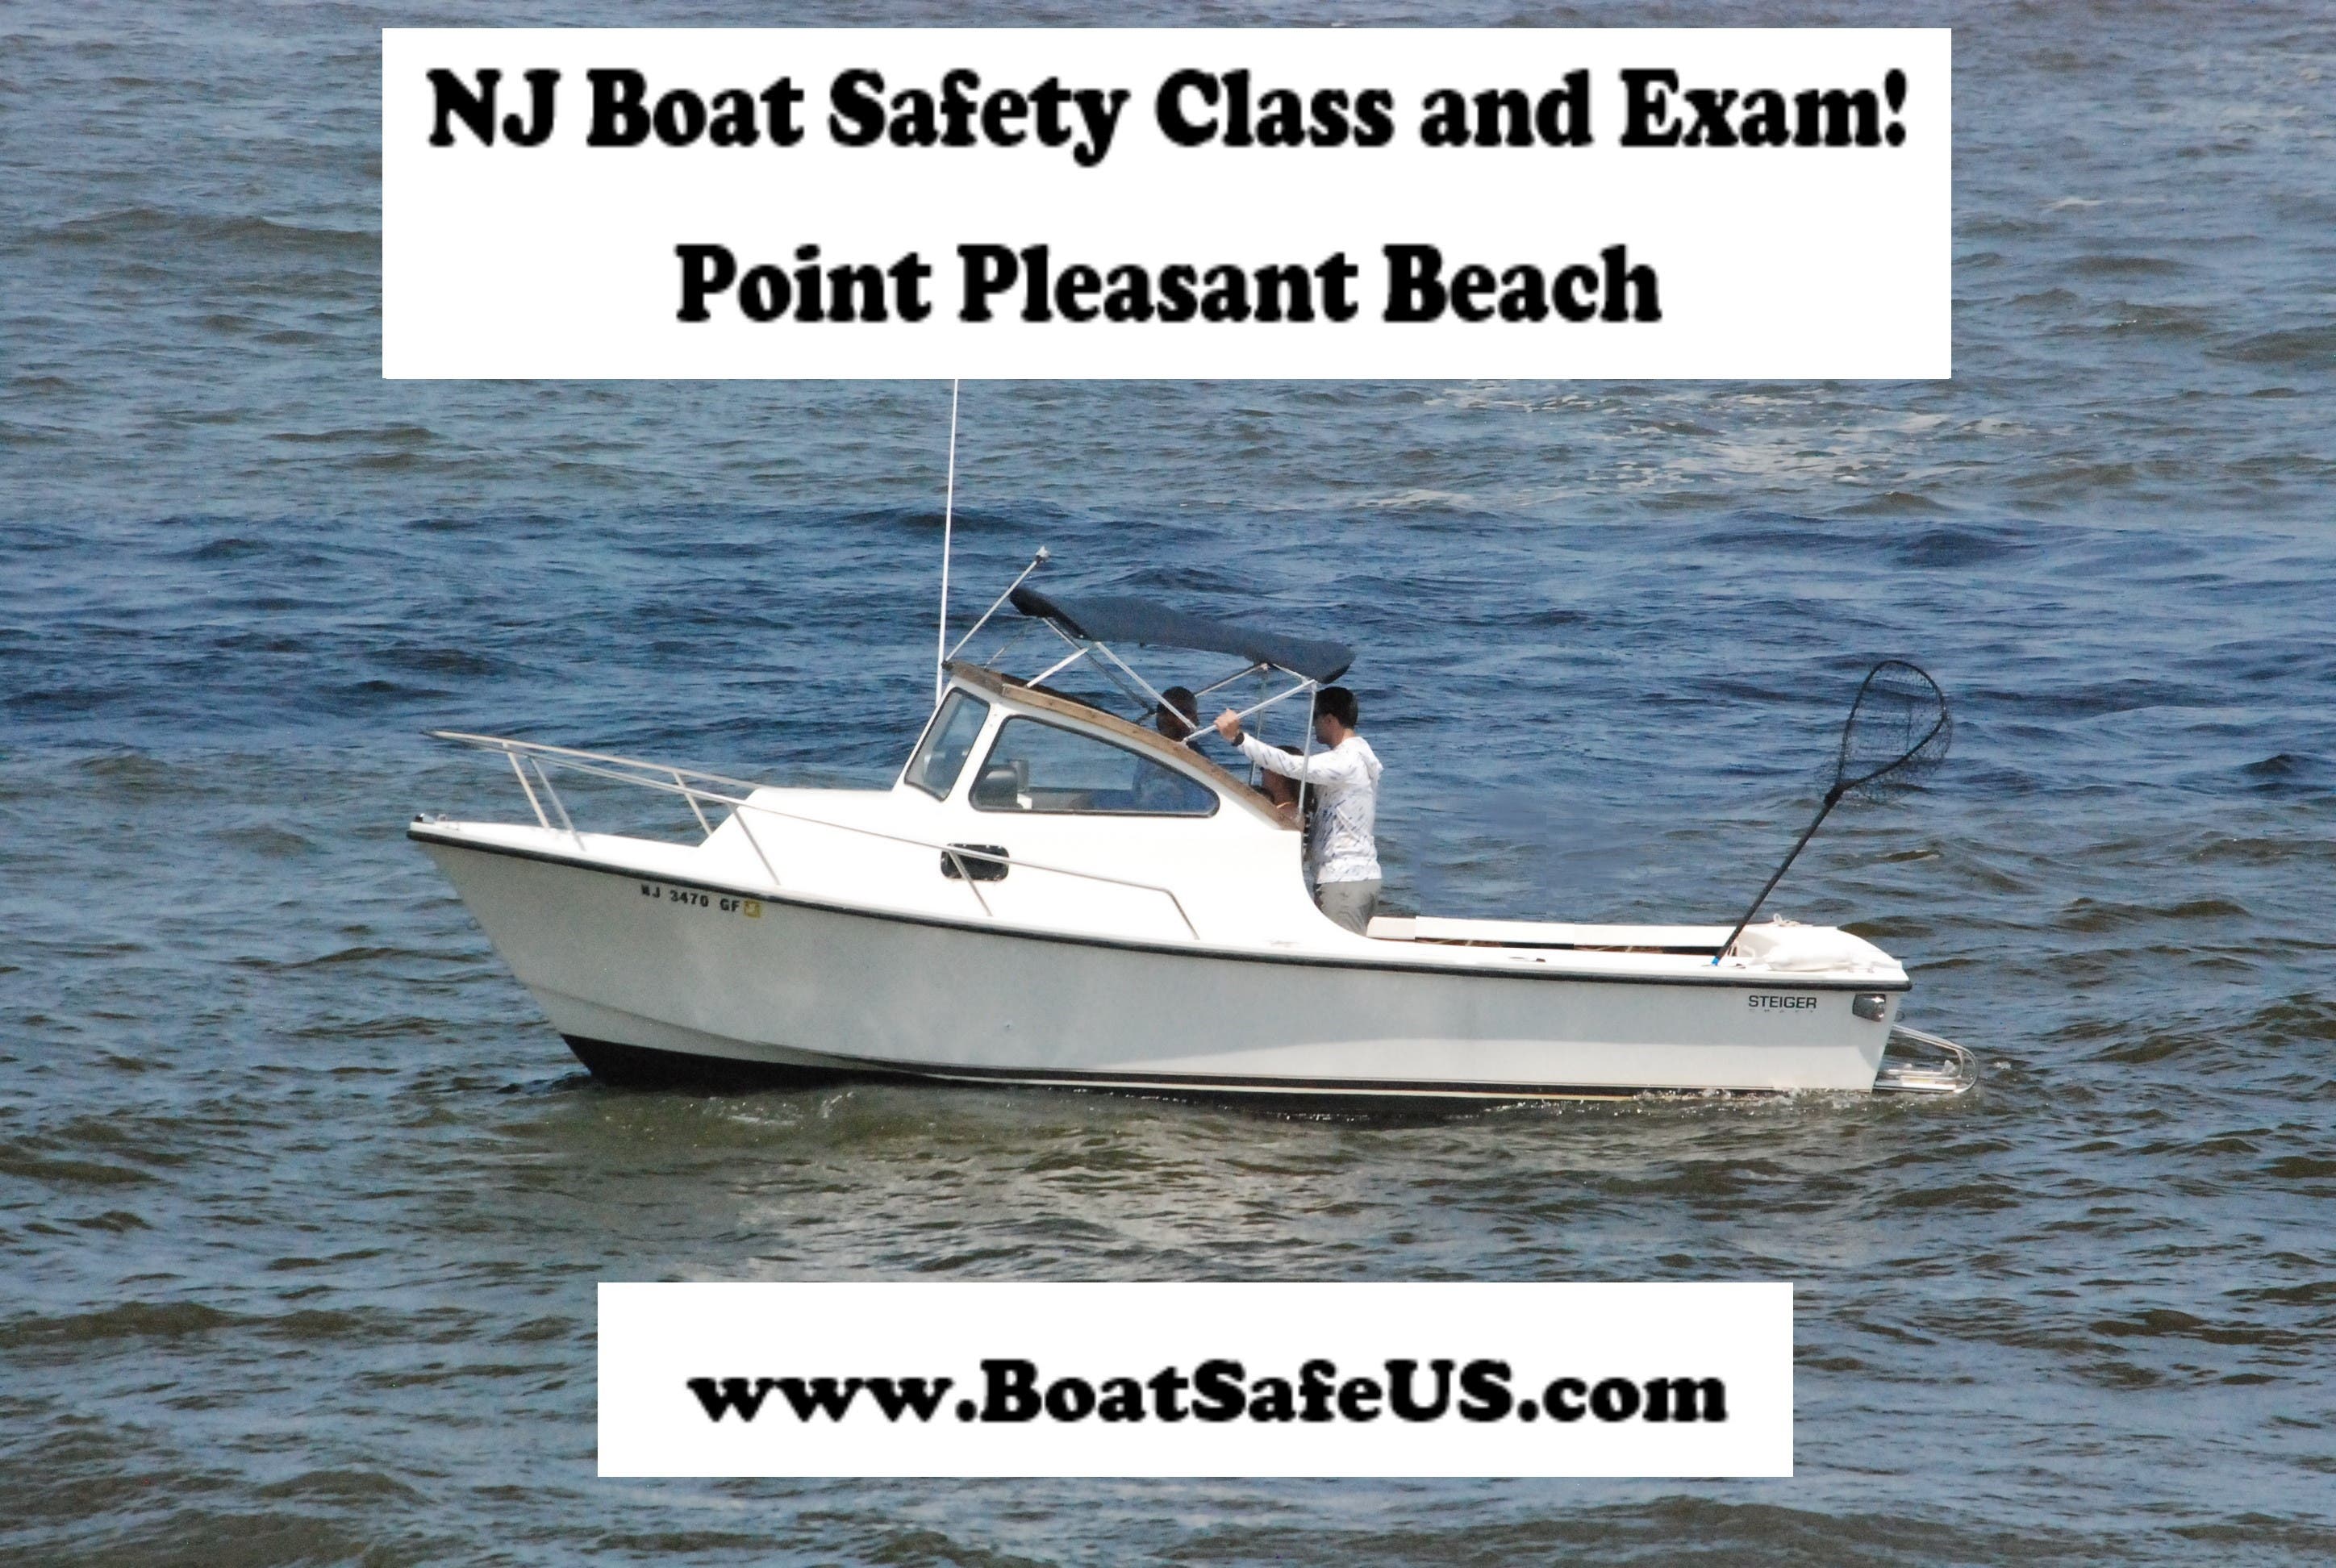 NJ Boat Safety Class in Point Pleasant Beach  (Two Night)